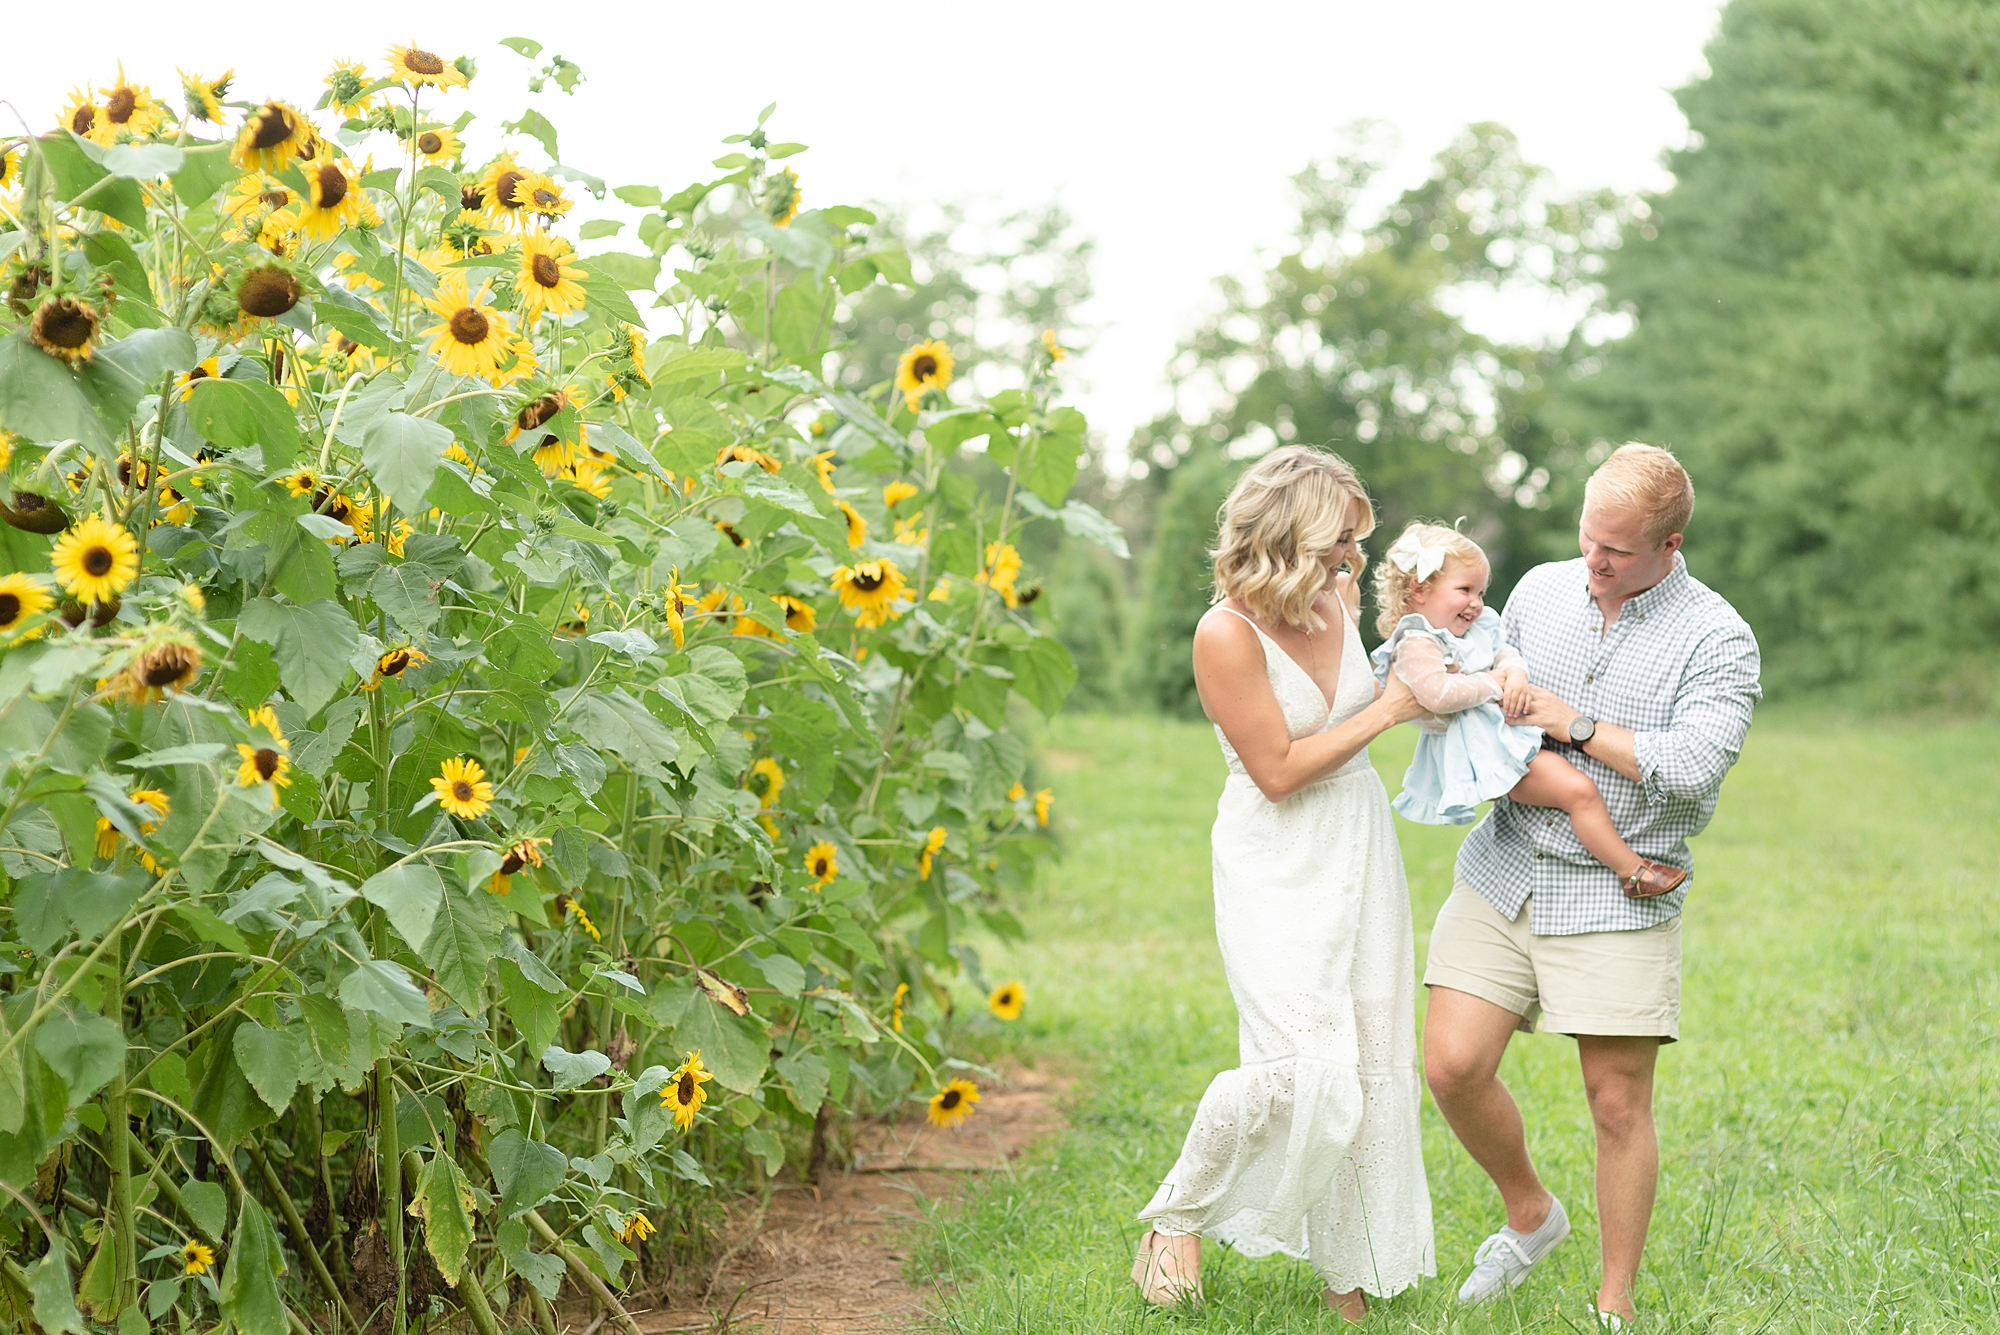 Mom and Dad are holding a toddler aged daughter while walking in a sunflower field on a summer day for family portraits